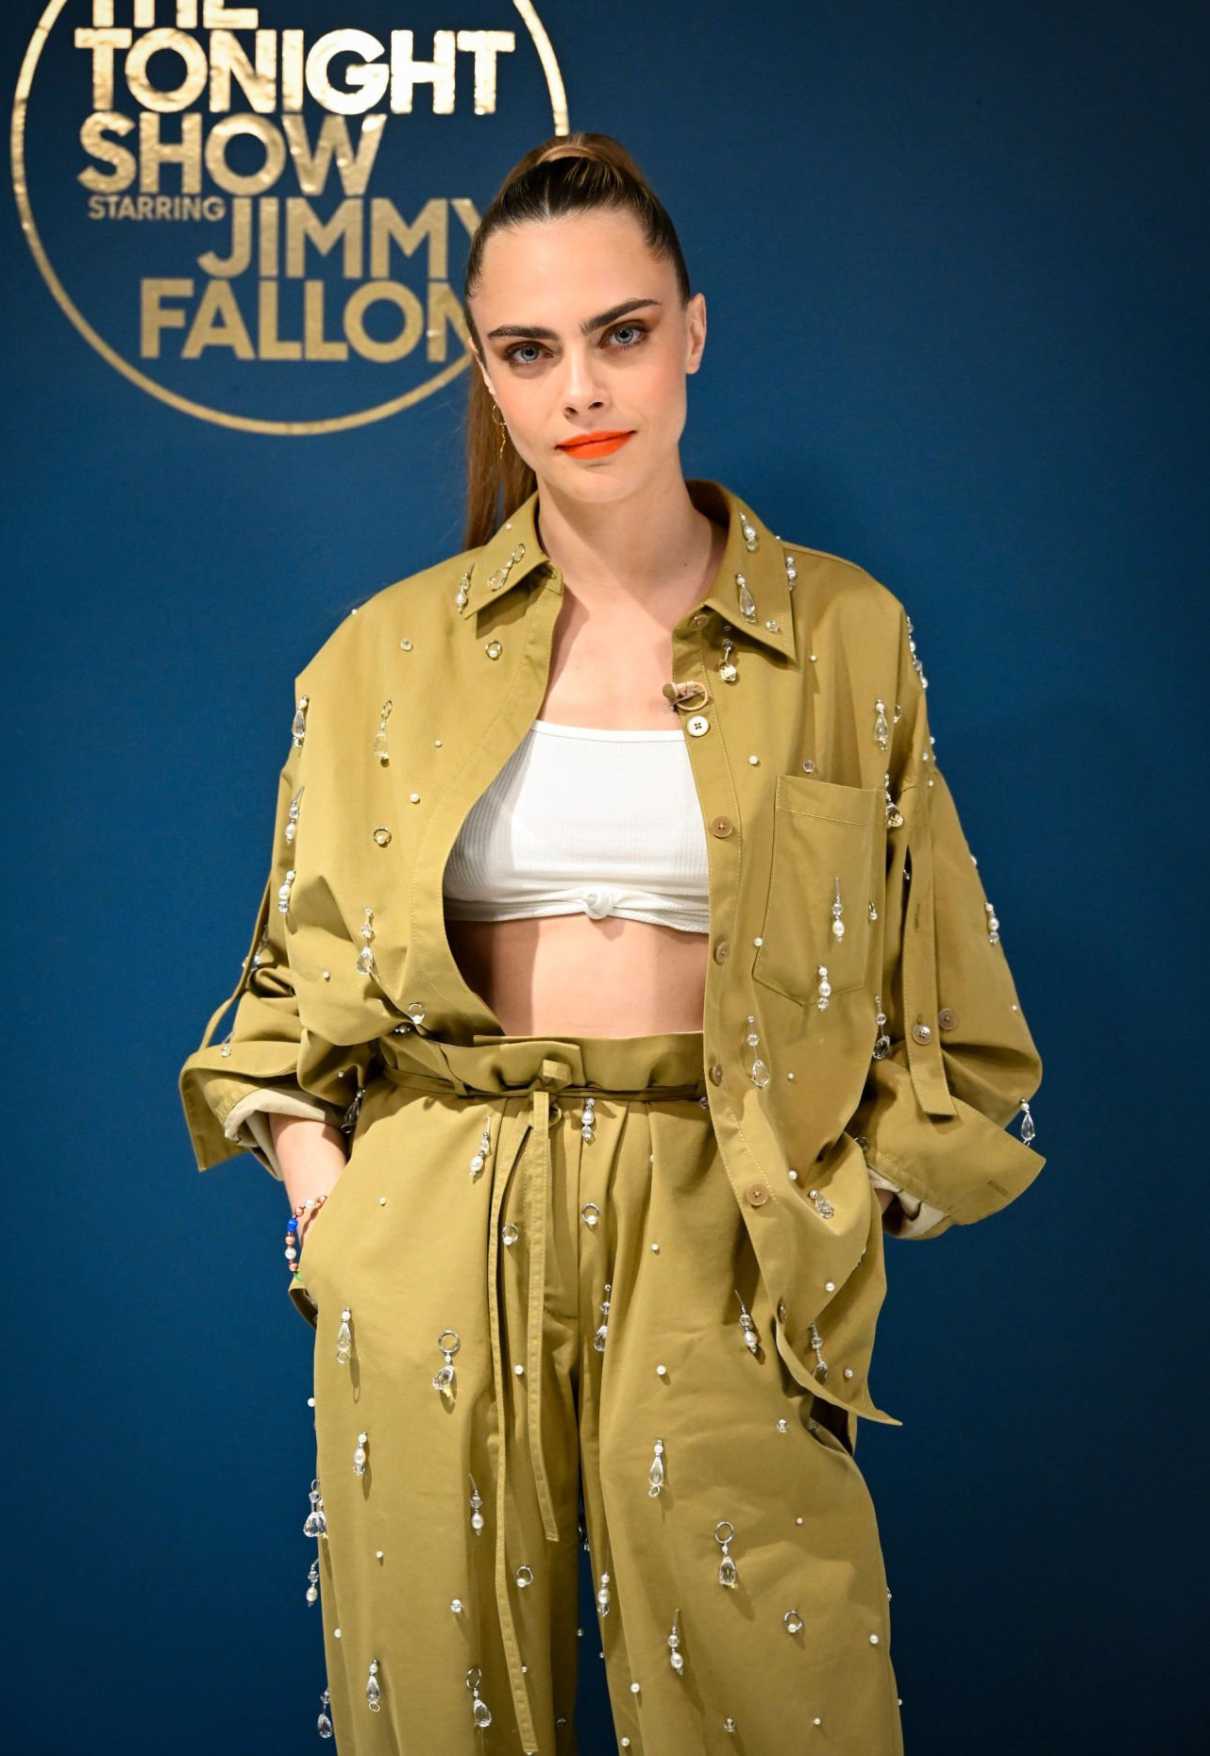 Cara Delevingne Attends The Tonight Show Starring Jimmy Fallon in New York 07/27/2022